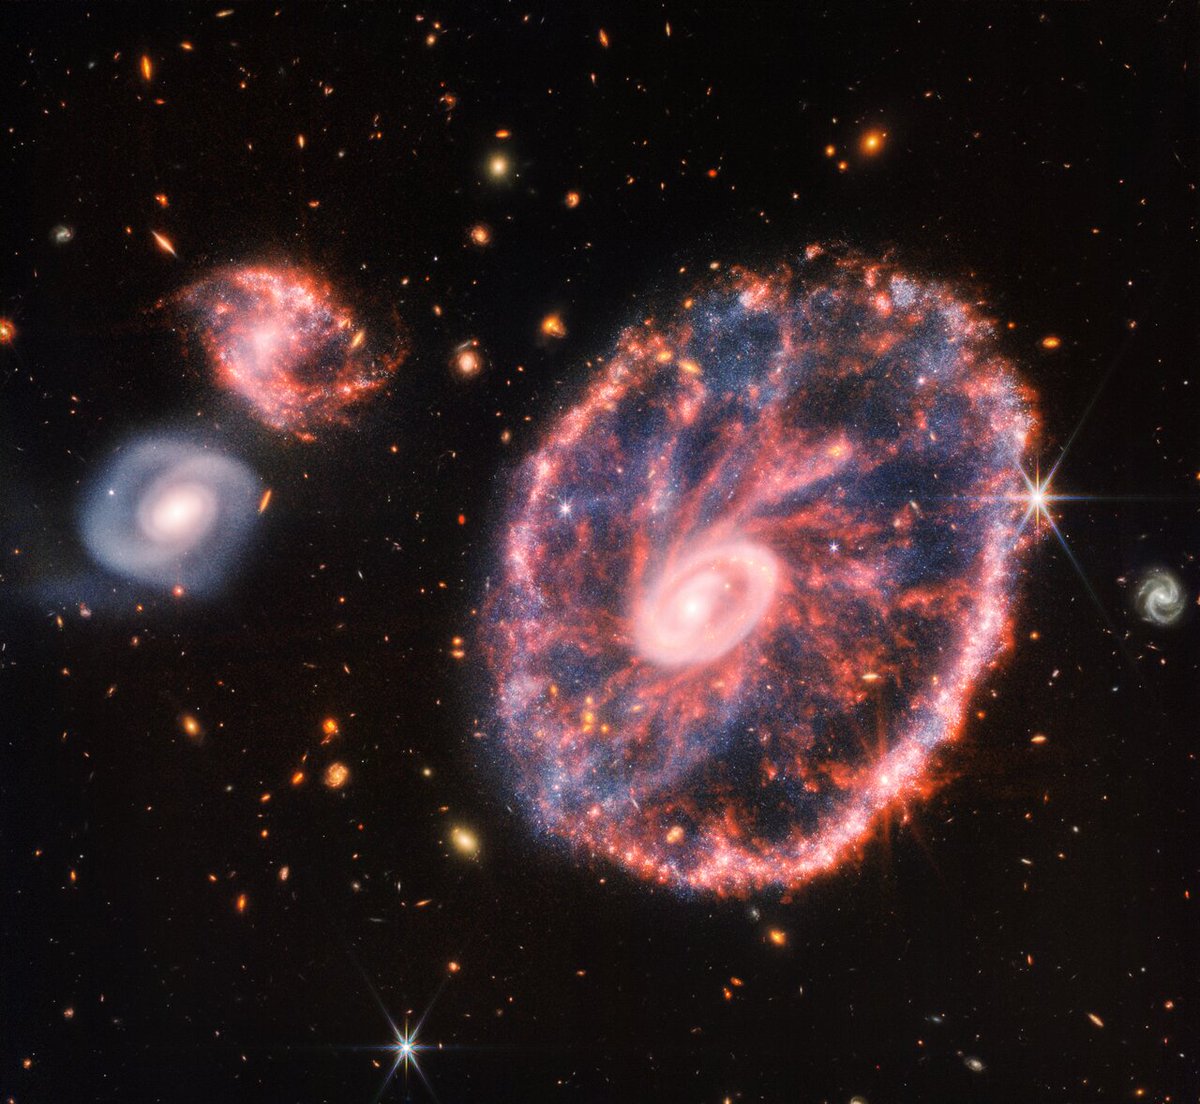 The latest James Webb Space Telescope image shows the Cartwheel Galaxy, a large spiral galaxy that collided with a smaller galaxy around 400 million years ago. Two great rings are the result, expanding powerfully outwards like the wash from a pool when a stone is dropped in.